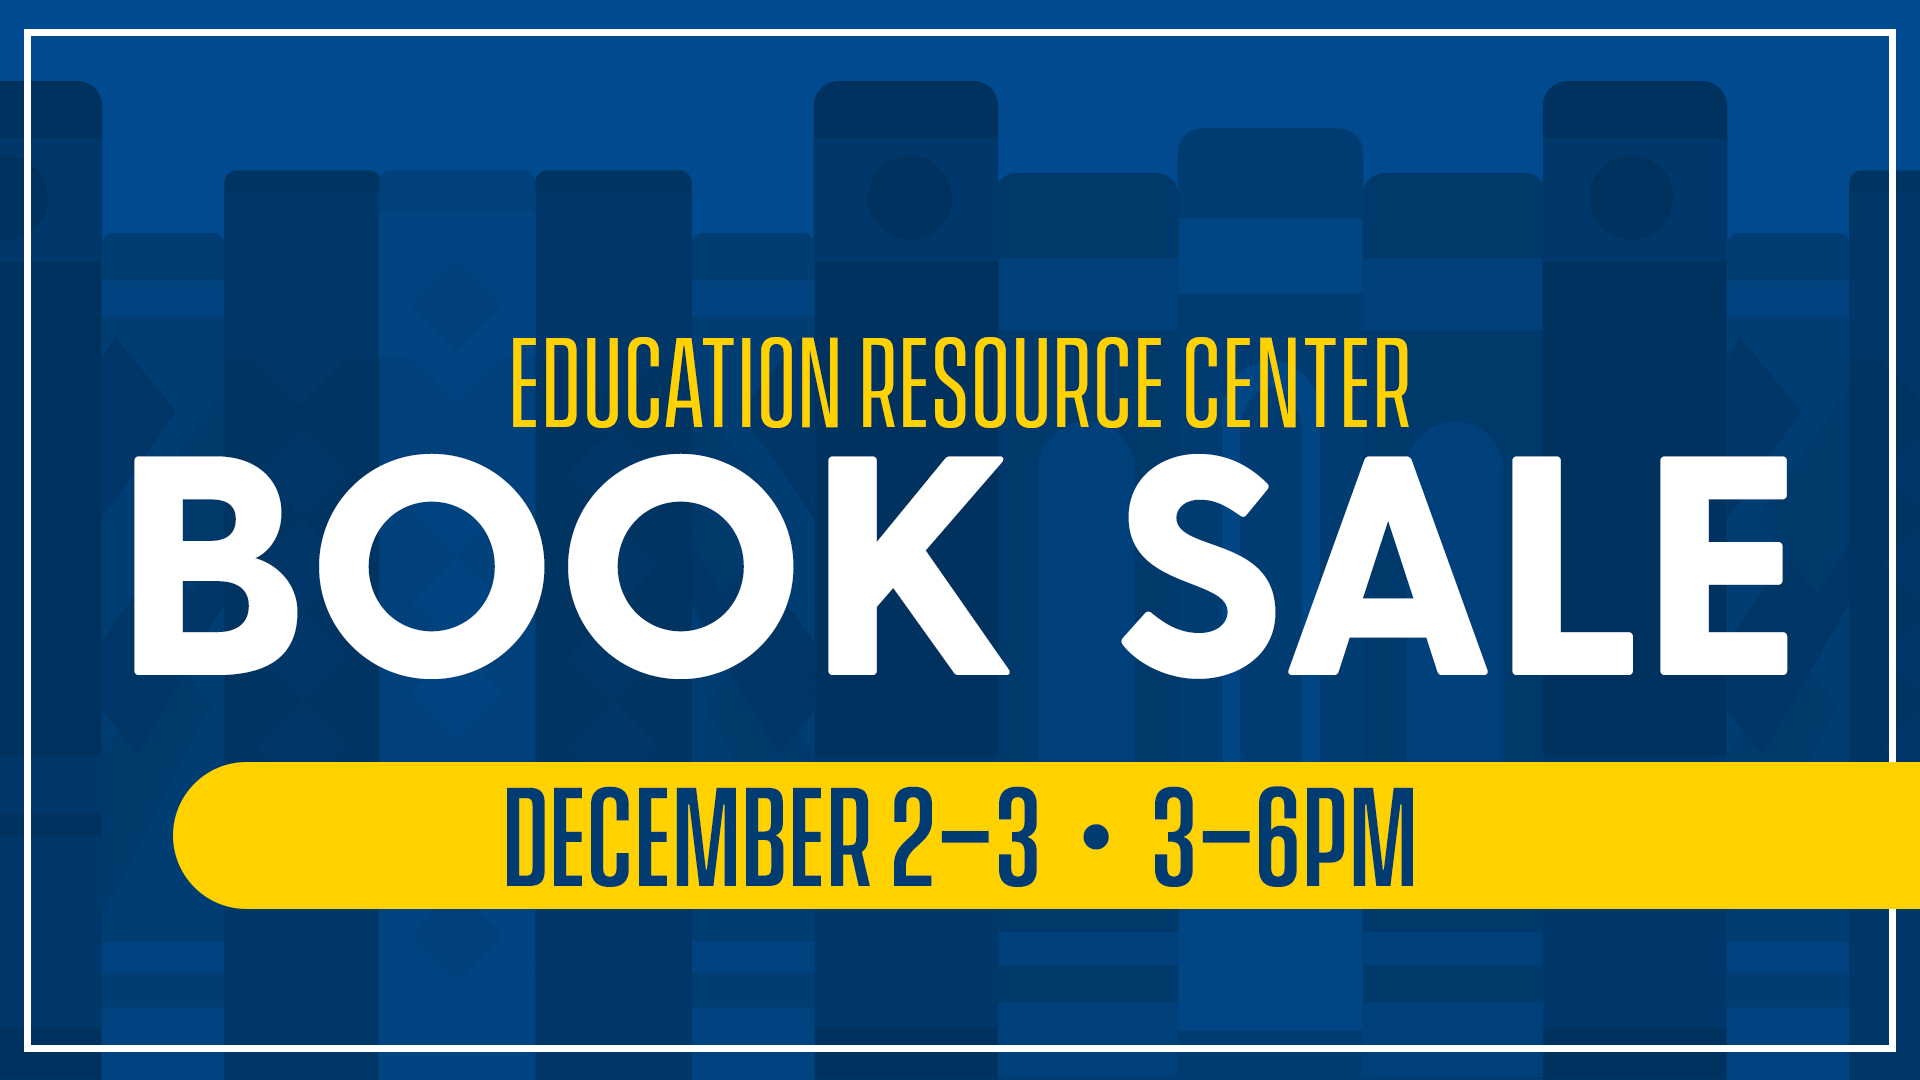 Promotional Banner for the Education Resource Center Book Sale